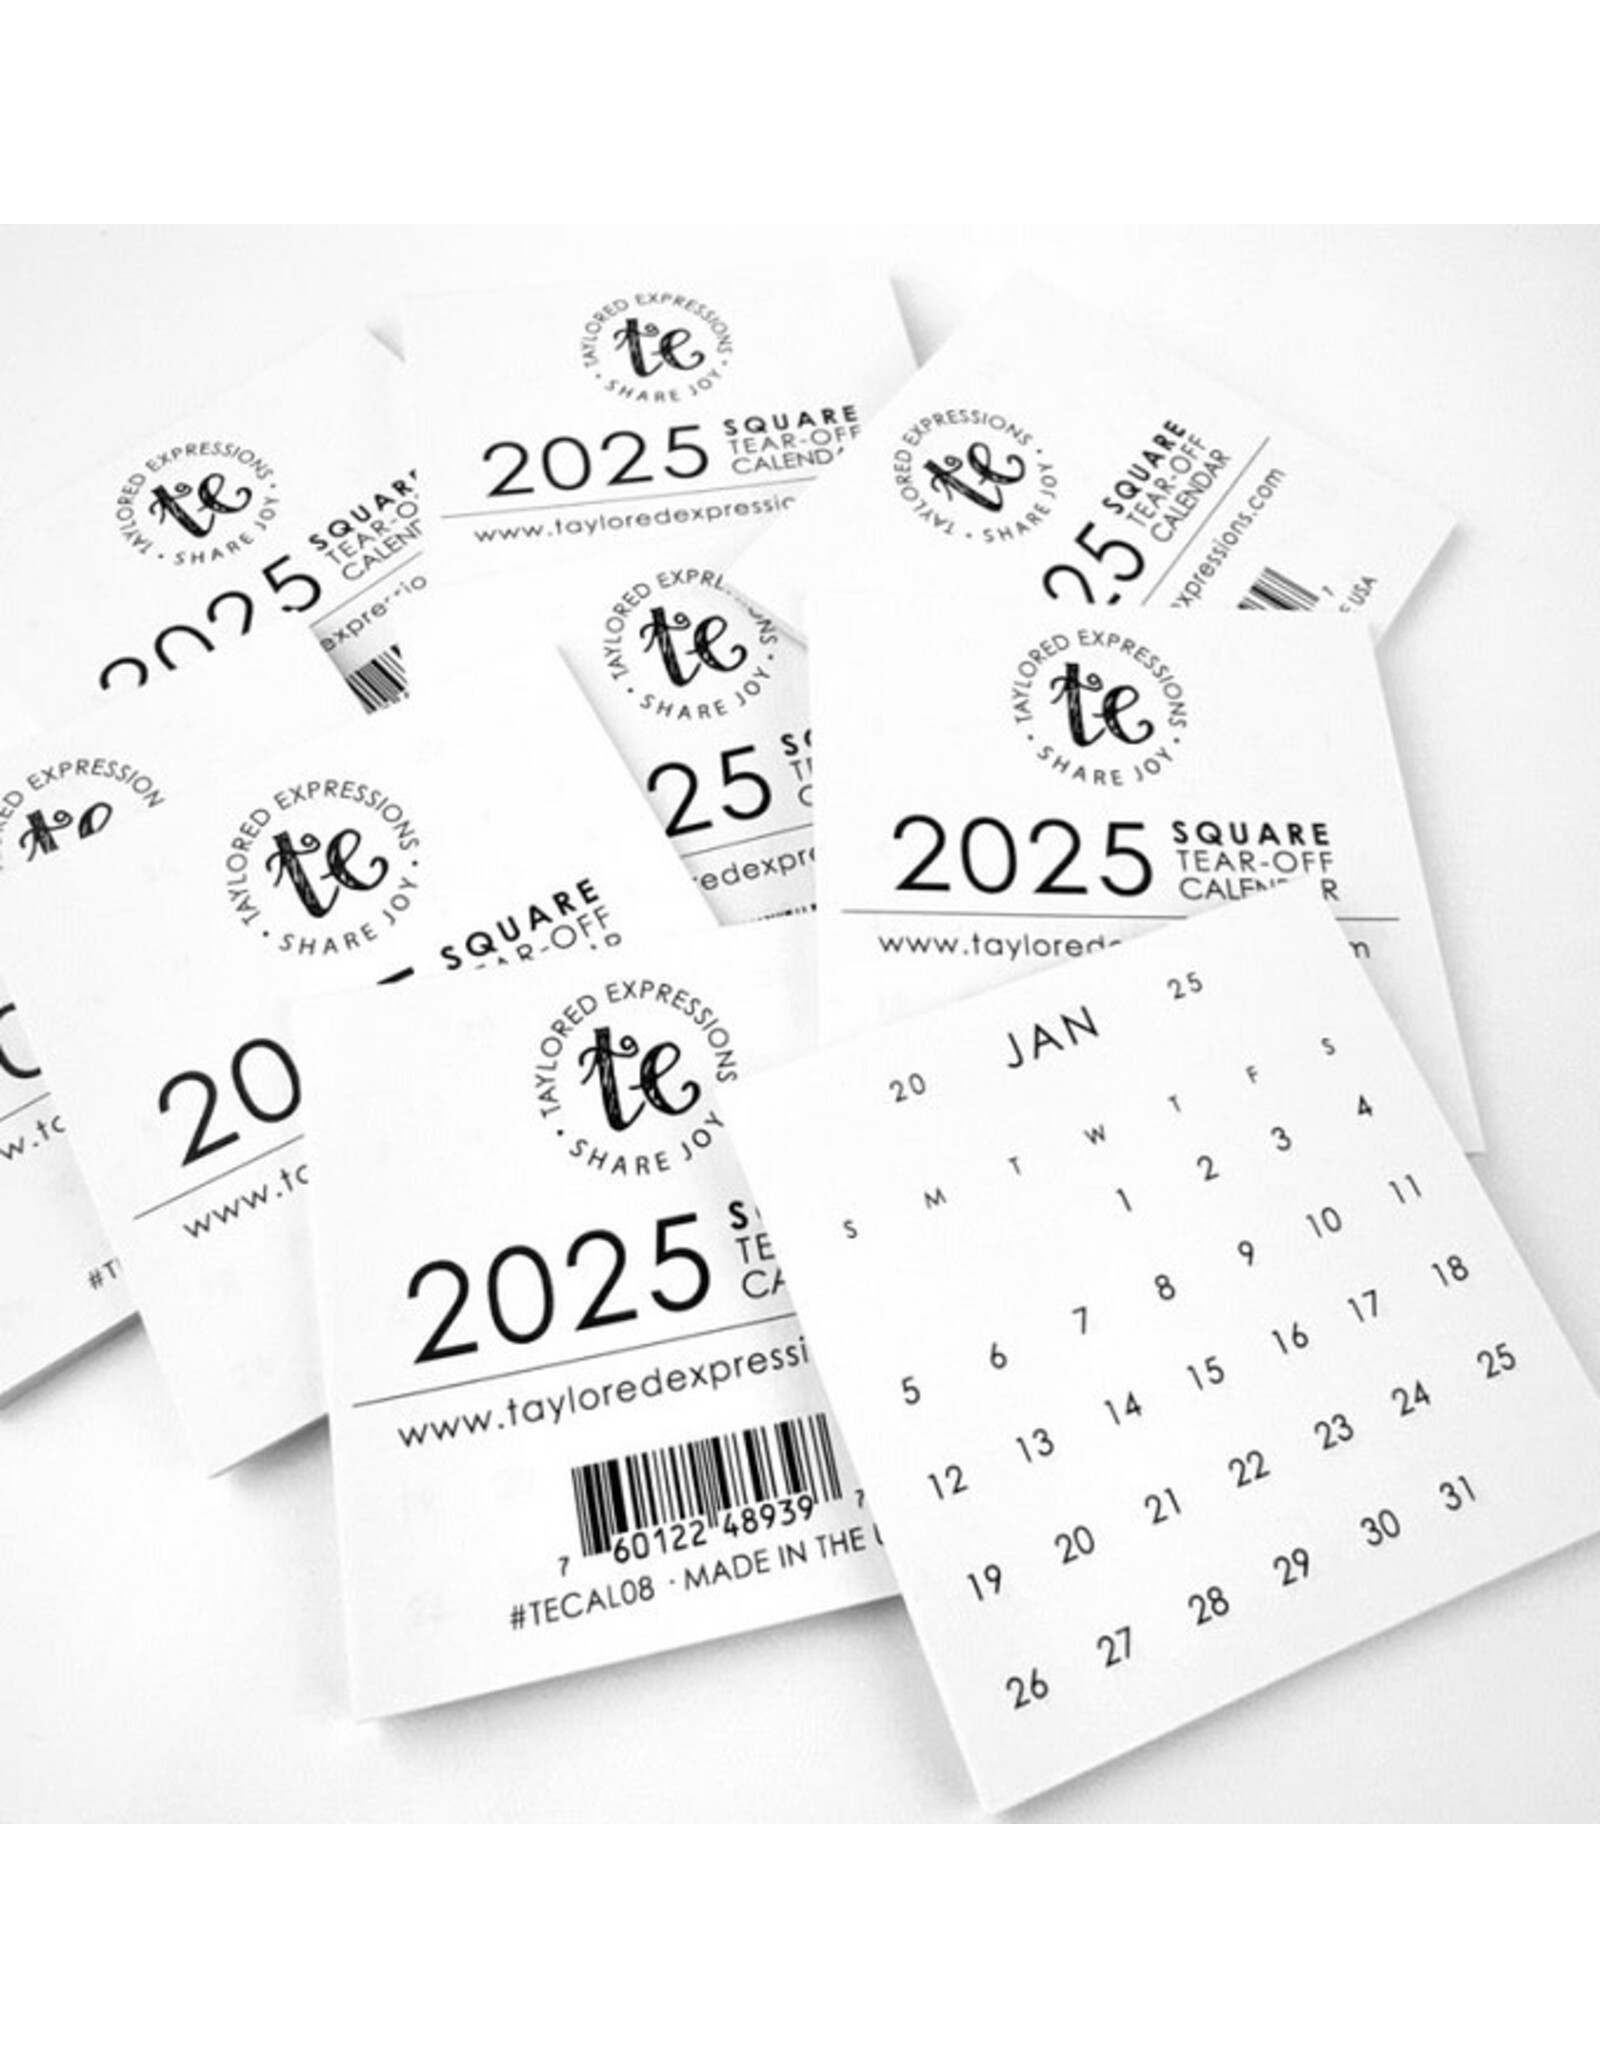 Taylored Expressions 2025 Square Tear Off Calendars (set of 10)